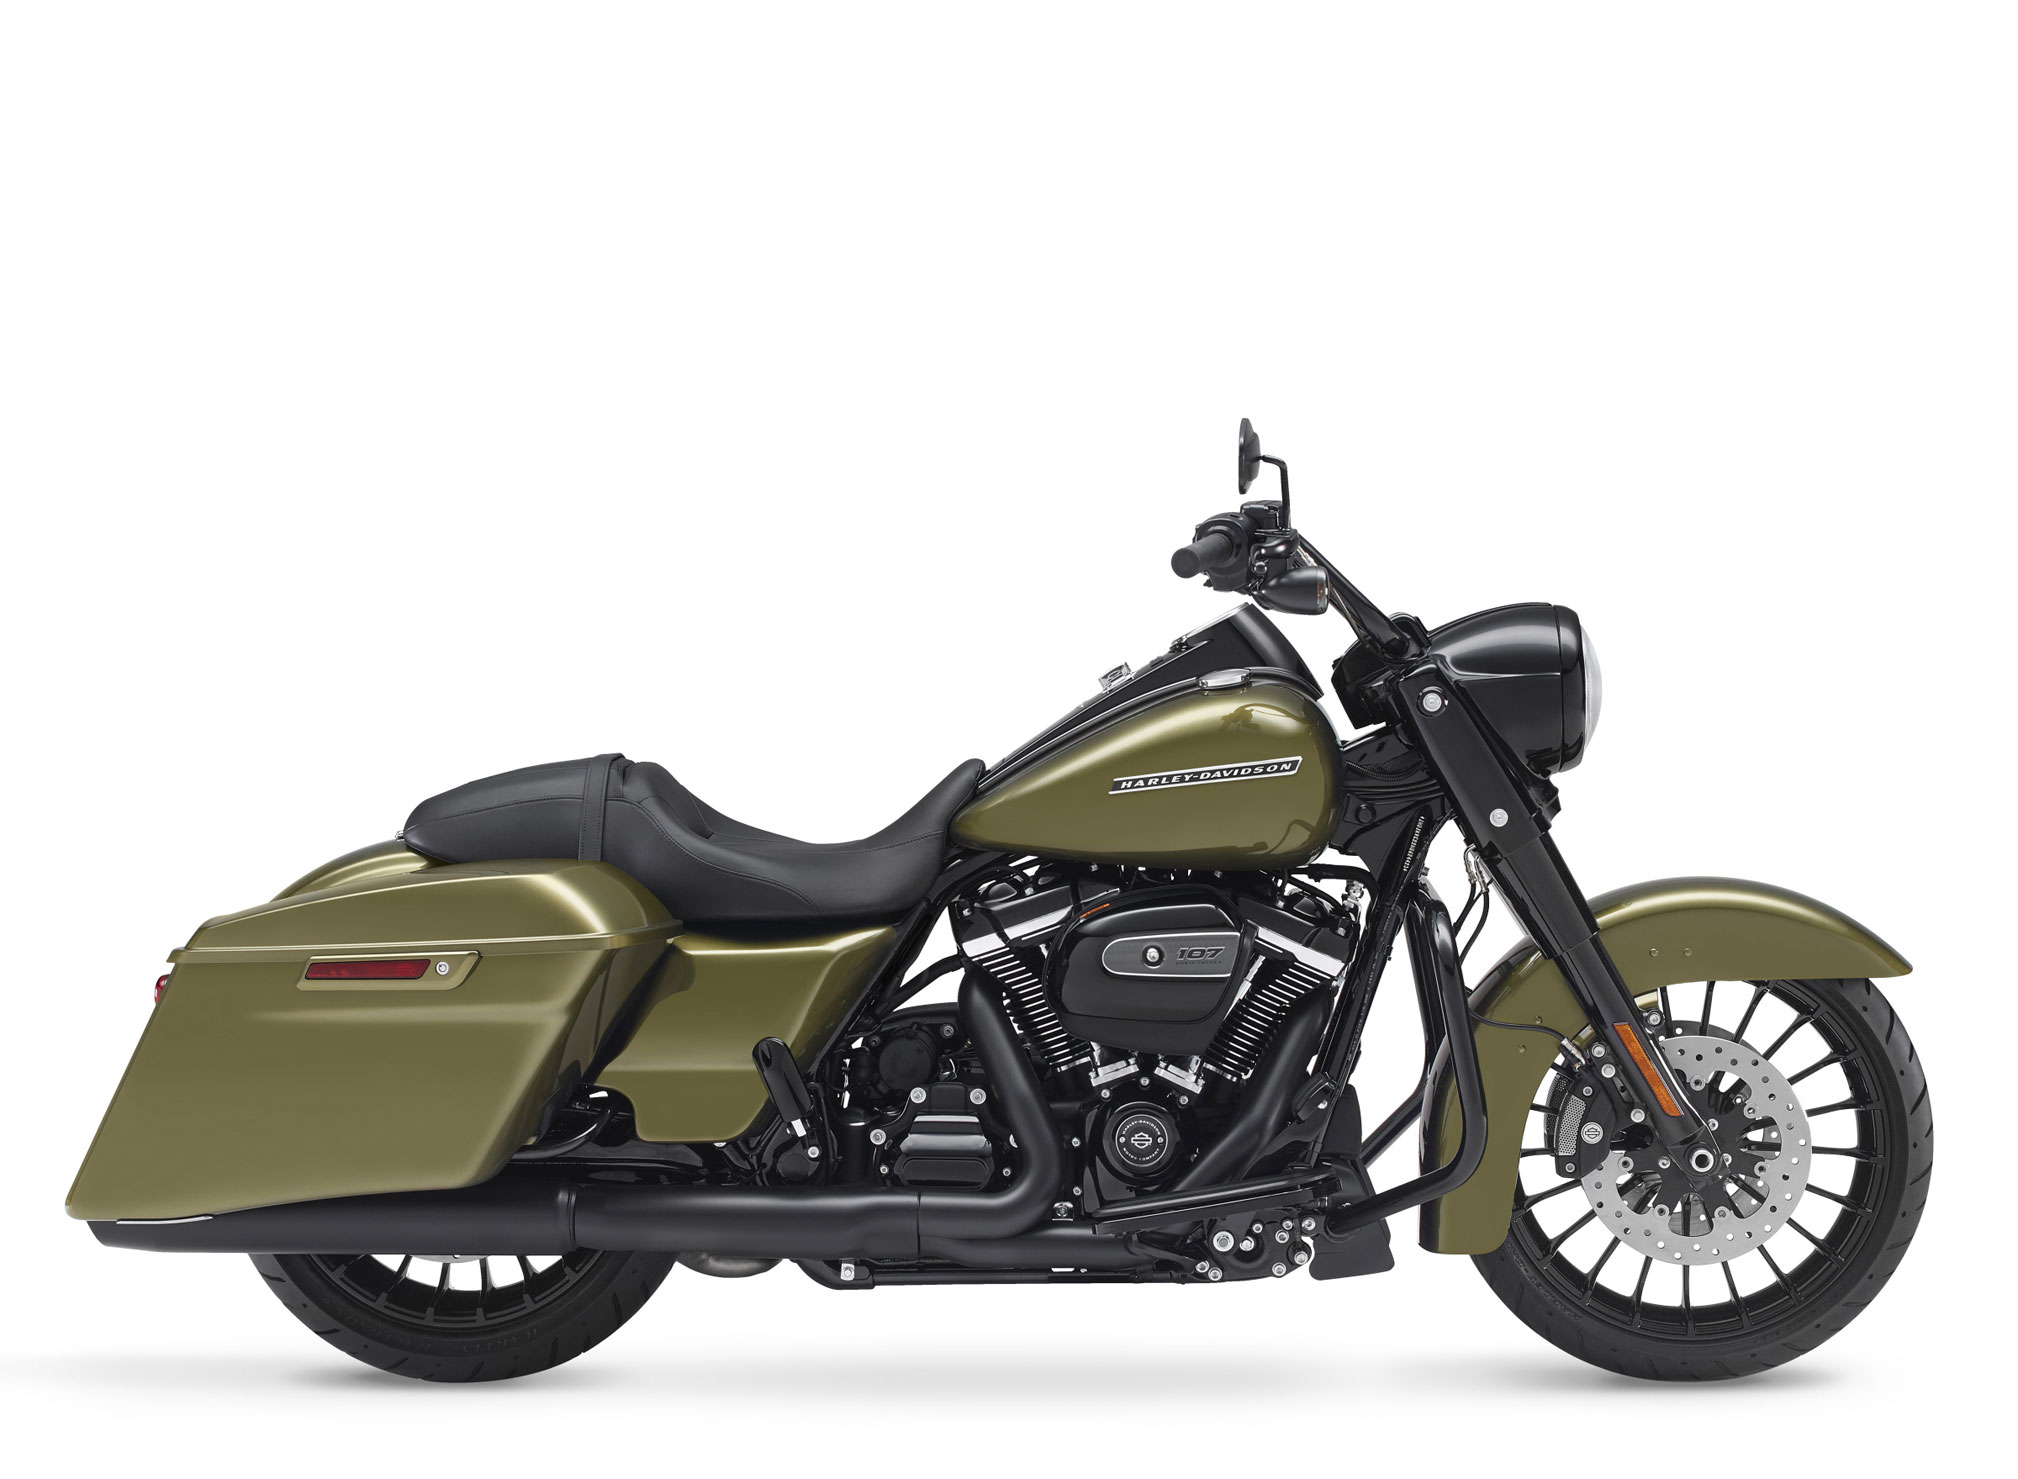 2018 Harley Davidson Road King Special Review Total Motorcycle